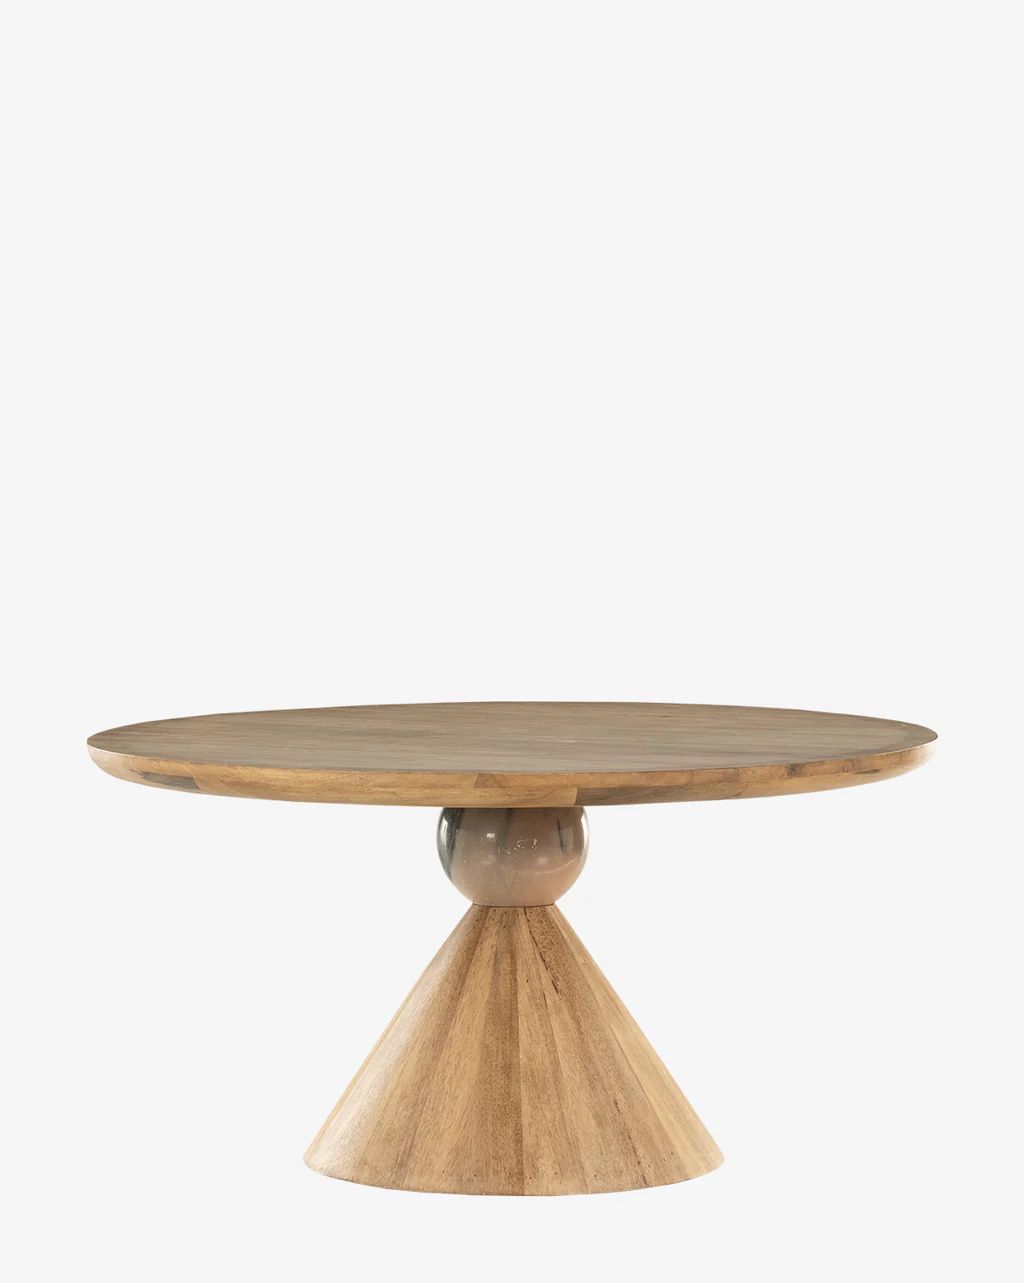 Pedretti Dining Table | McGee & Co.